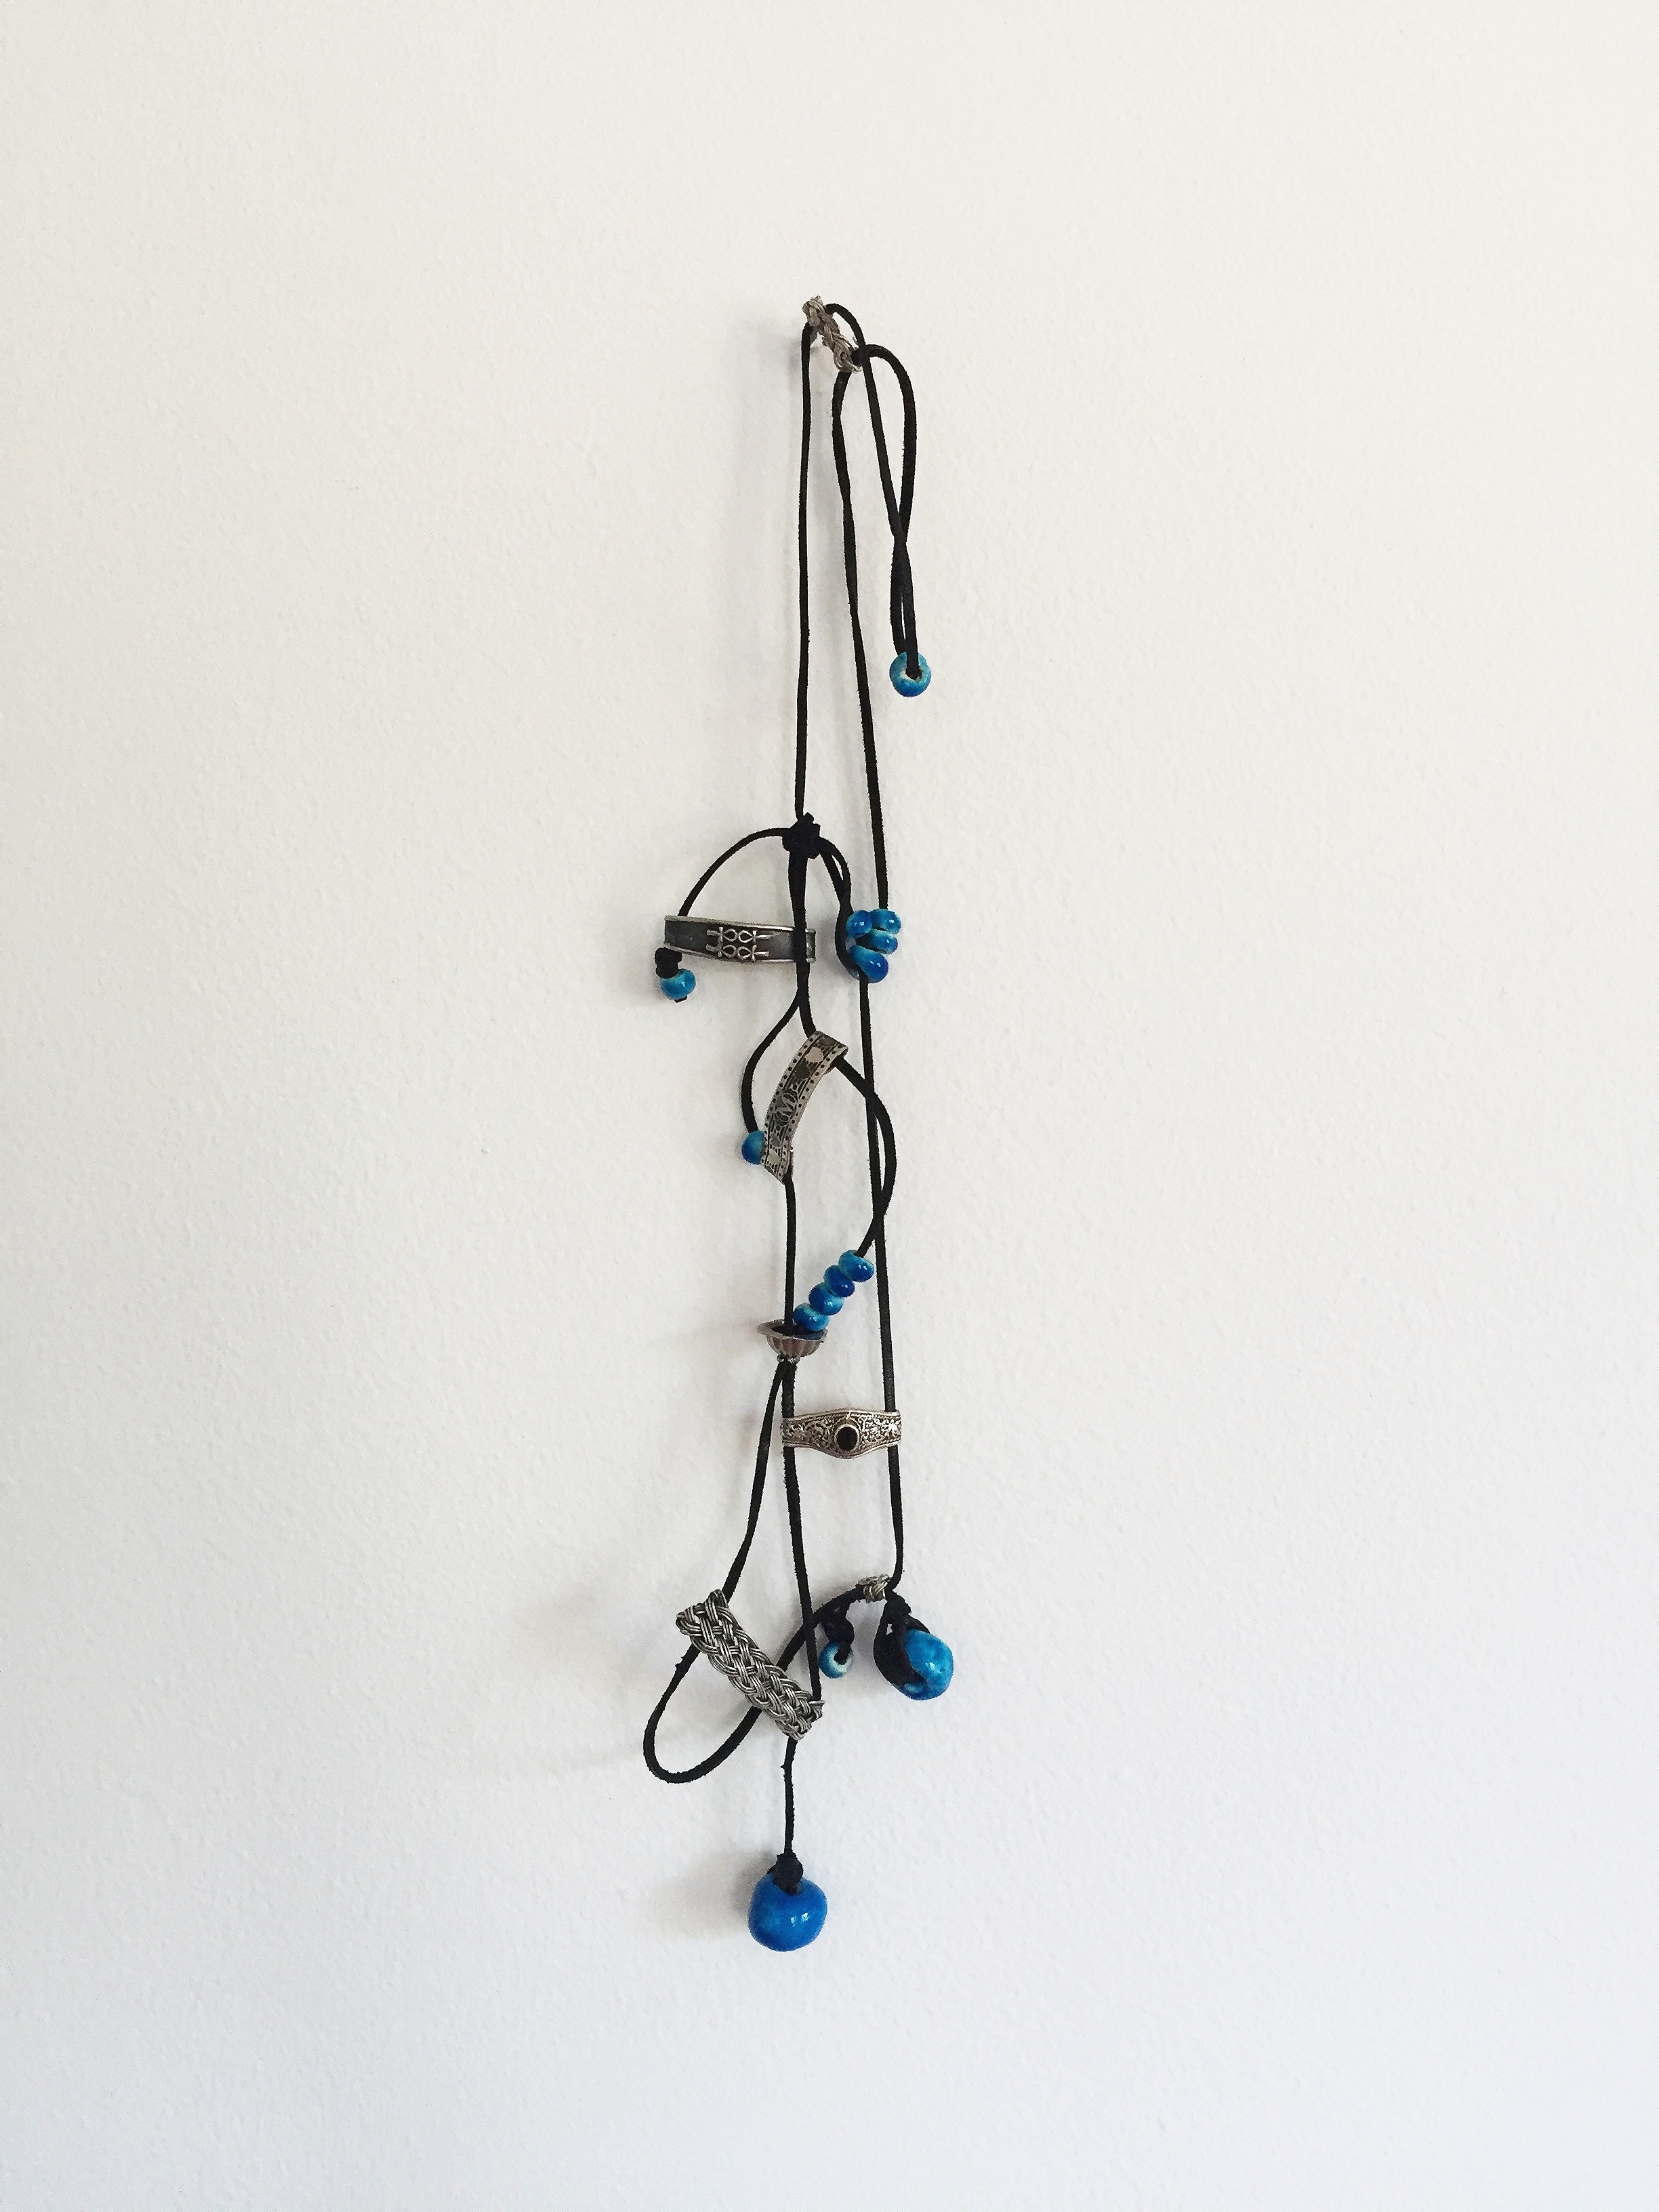   Souvenir , 2016  leather cord, silver rings, ceramic beads 